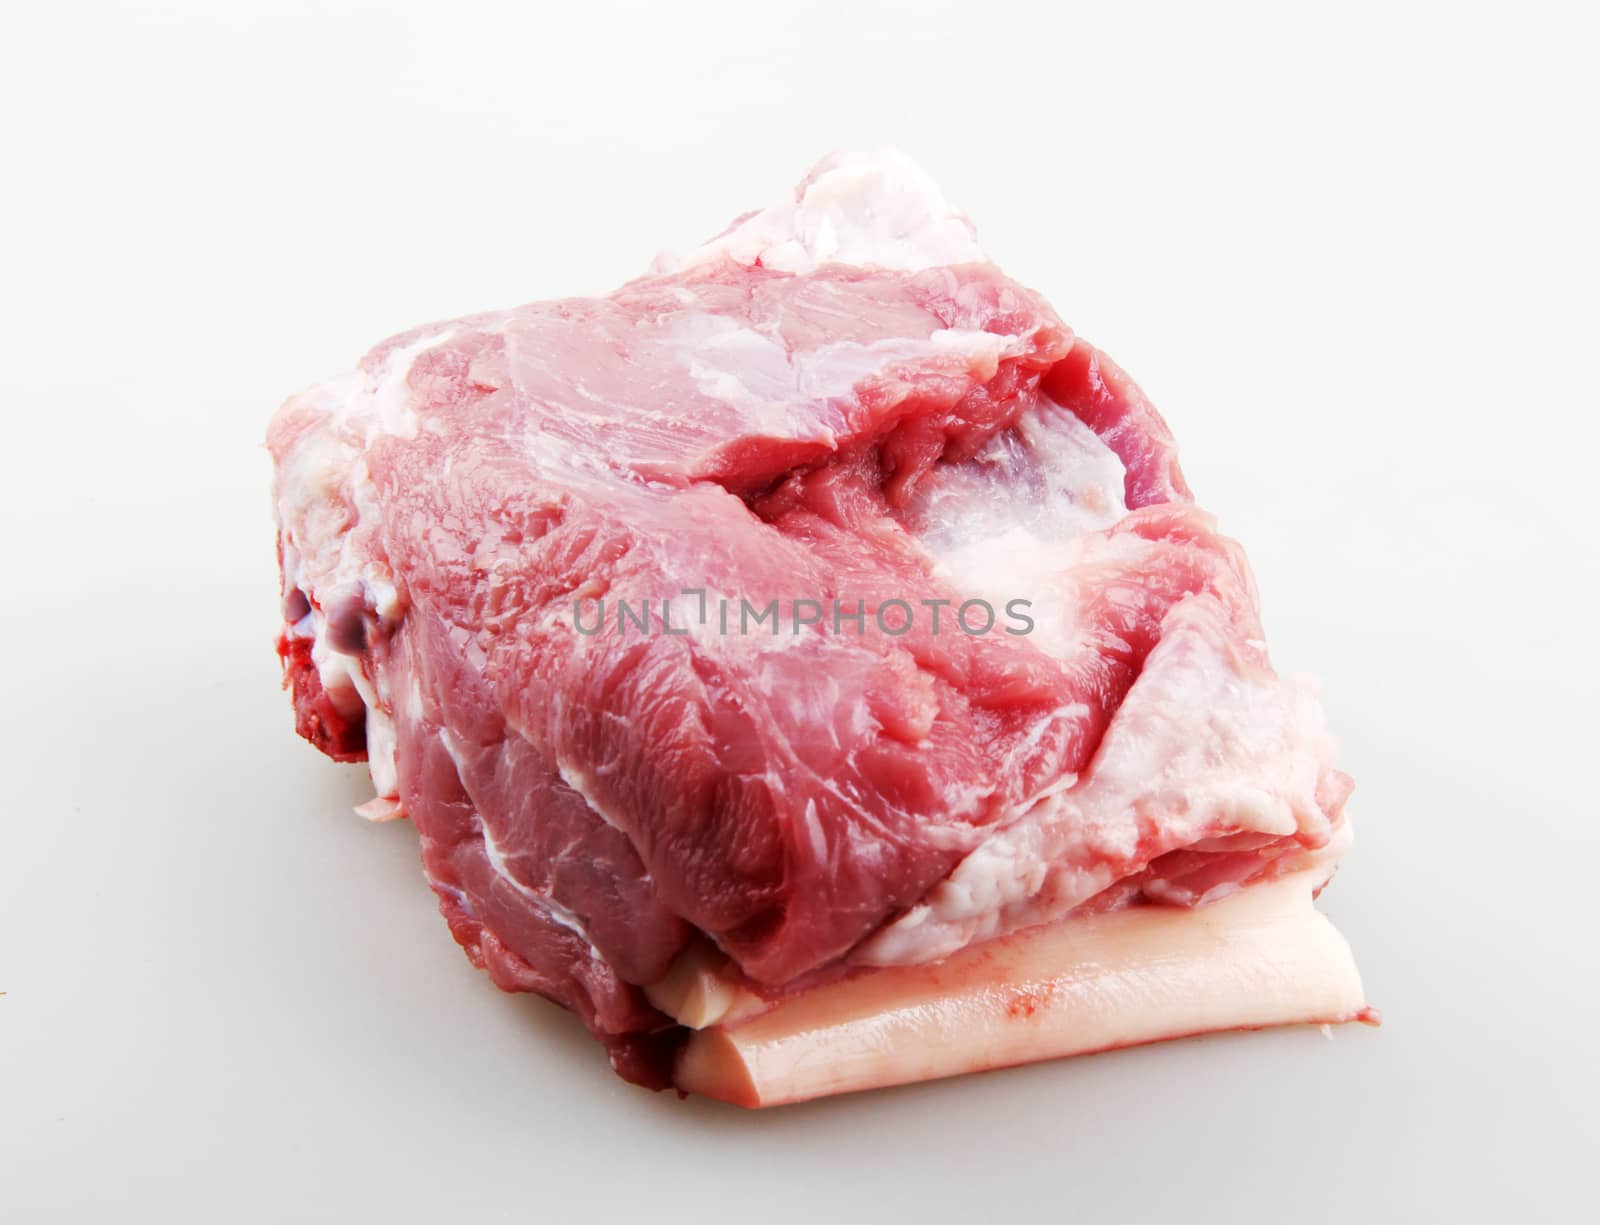 Fresh Meat Against White Background by nenovbrothers